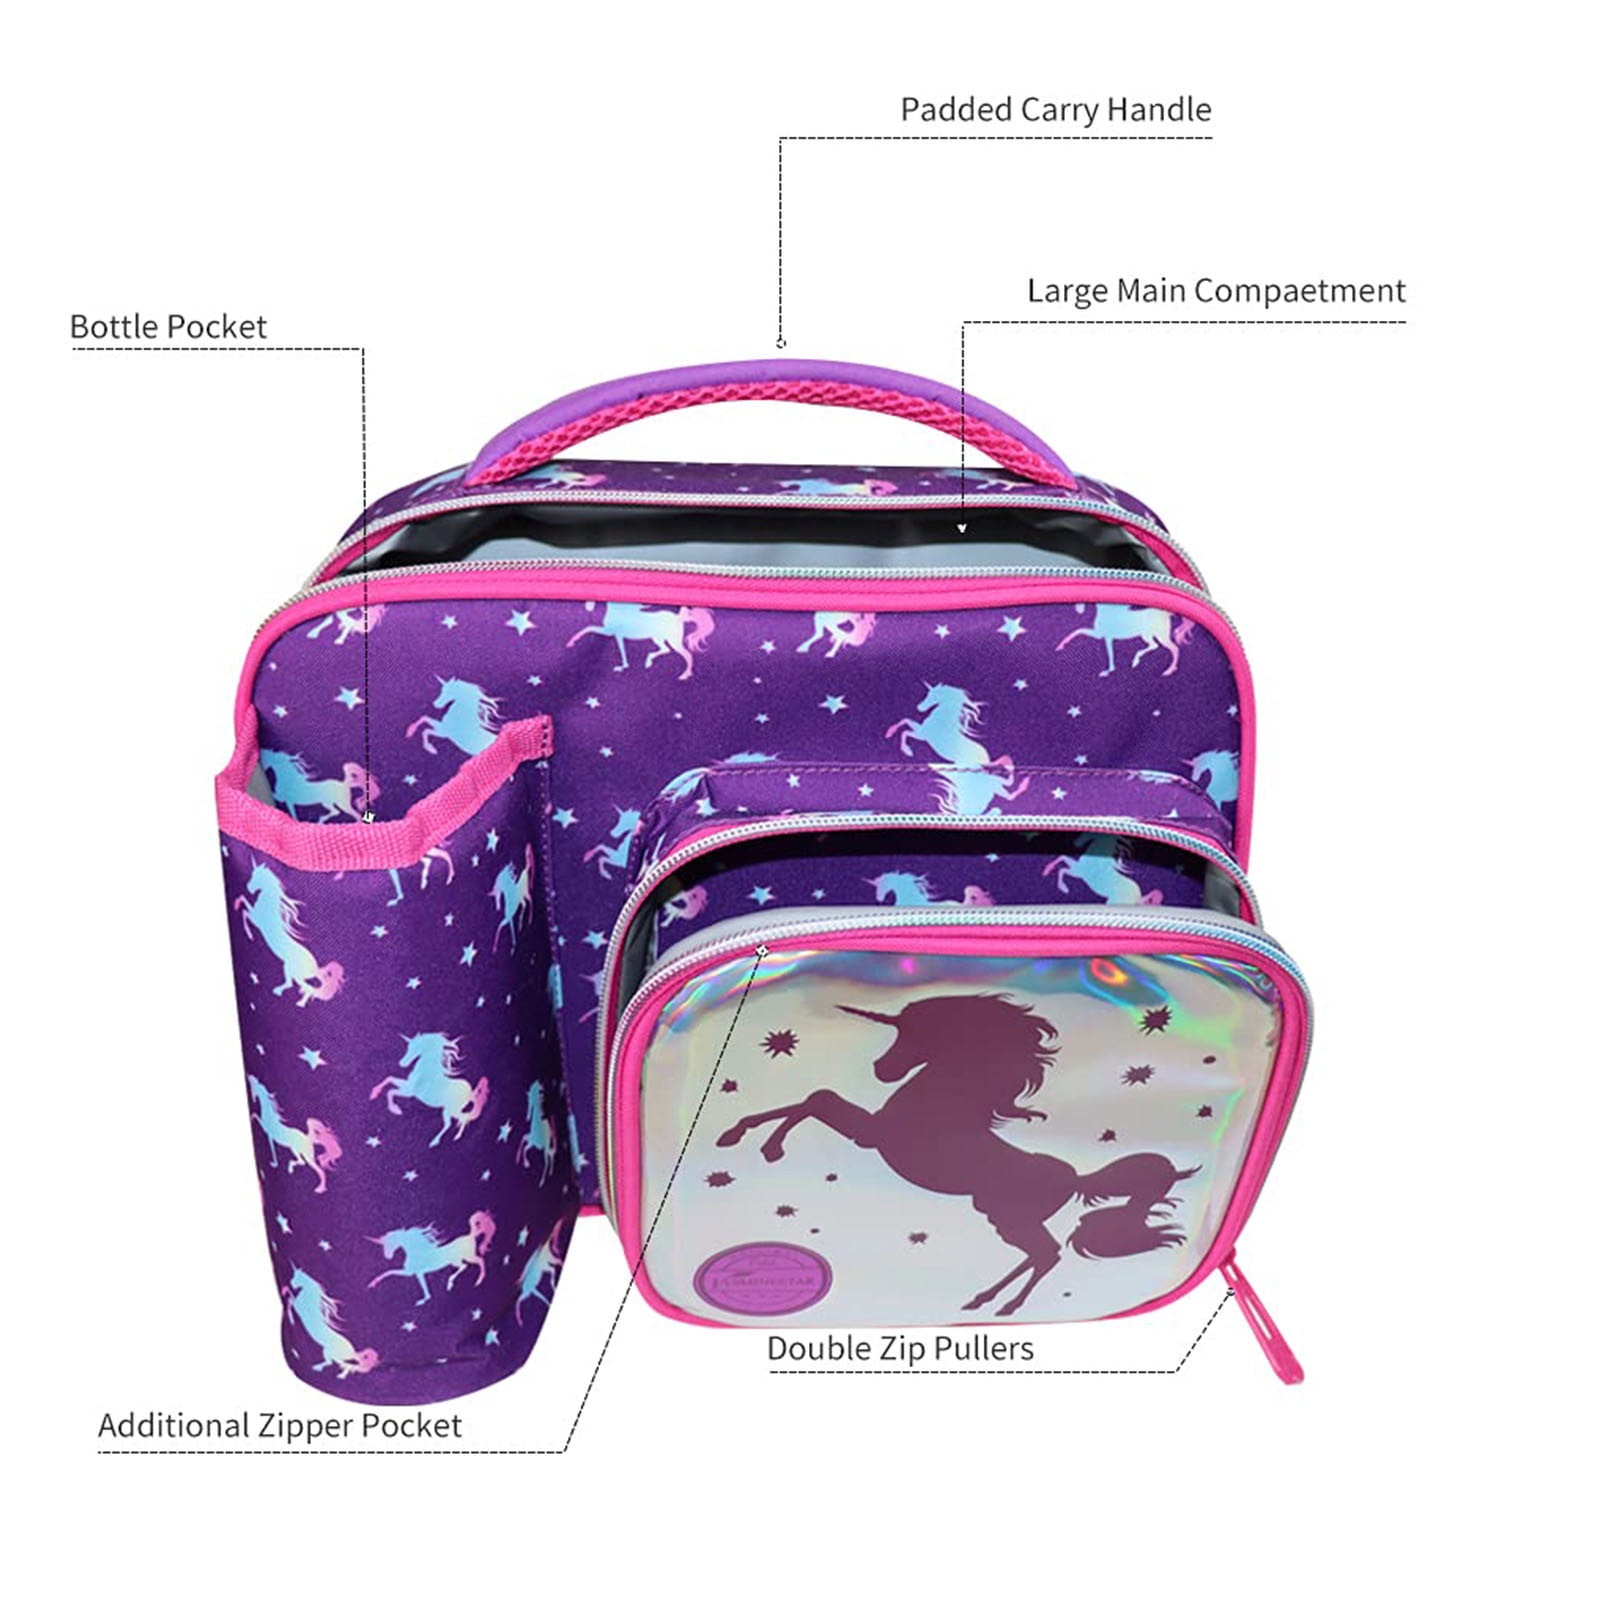 Accessory Innovations Bluey Kids Lunch Box Bluey and Bingo Raised Character Insulated Lunch Bag Tote for Hot and Cold Food, Drinks, and Snacks